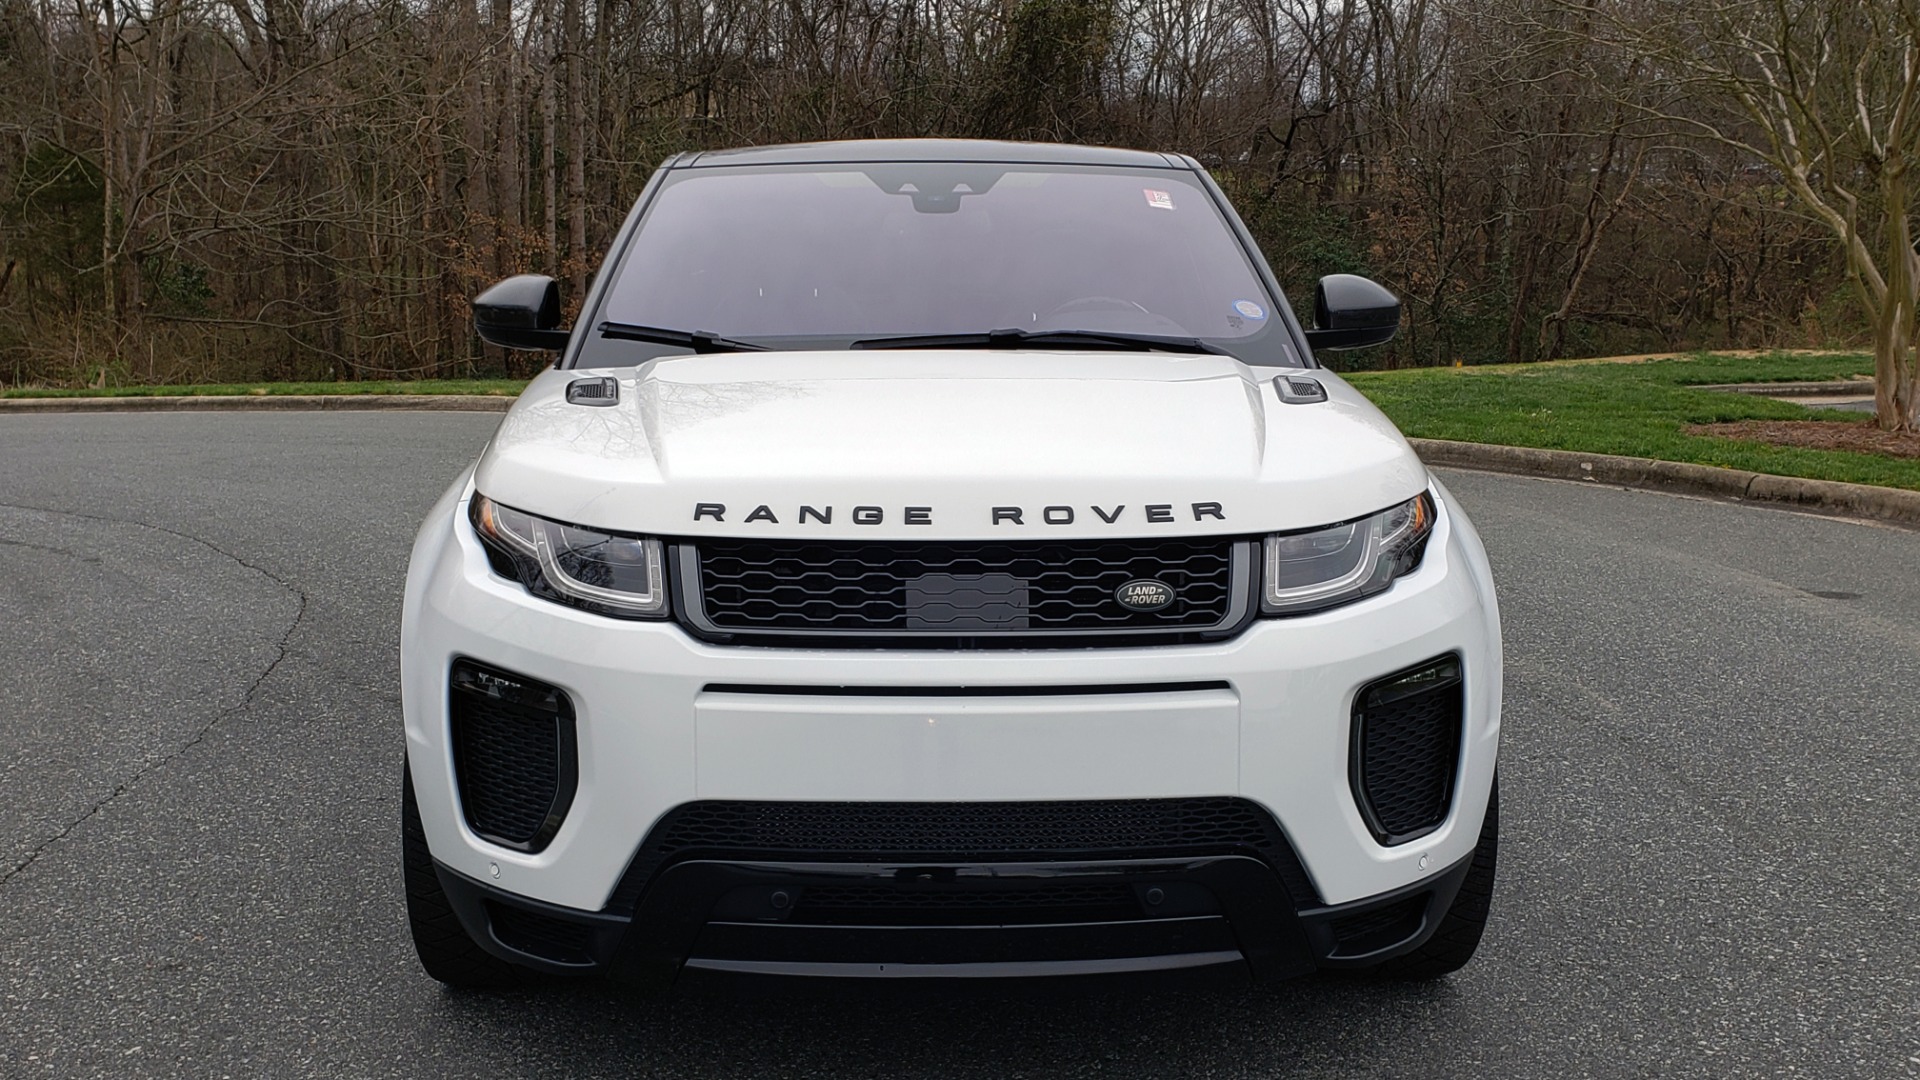 Used 2016 Land Rover RANGE ROVER EVOQUE HSE DYNAMIC / AWD / NAV / PANO-ROOF / REARVIEW / 22-IN WHEELS for sale Sold at Formula Imports in Charlotte NC 28227 24